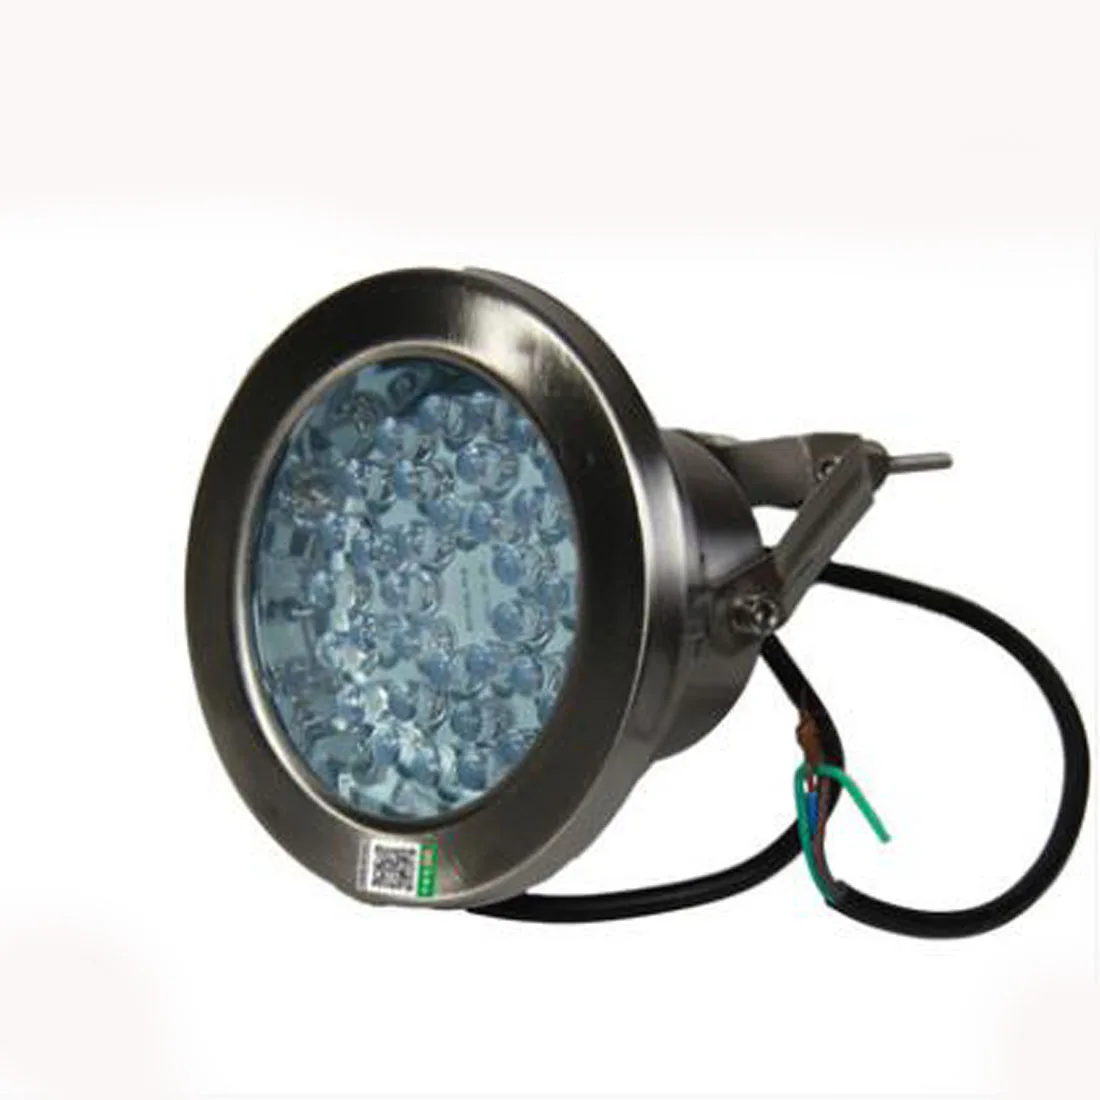 Fountain LED underwater lamp waterproof landscape garden lamp stainless steel Yongquan hole lamp low voltage 24V colorful monoch